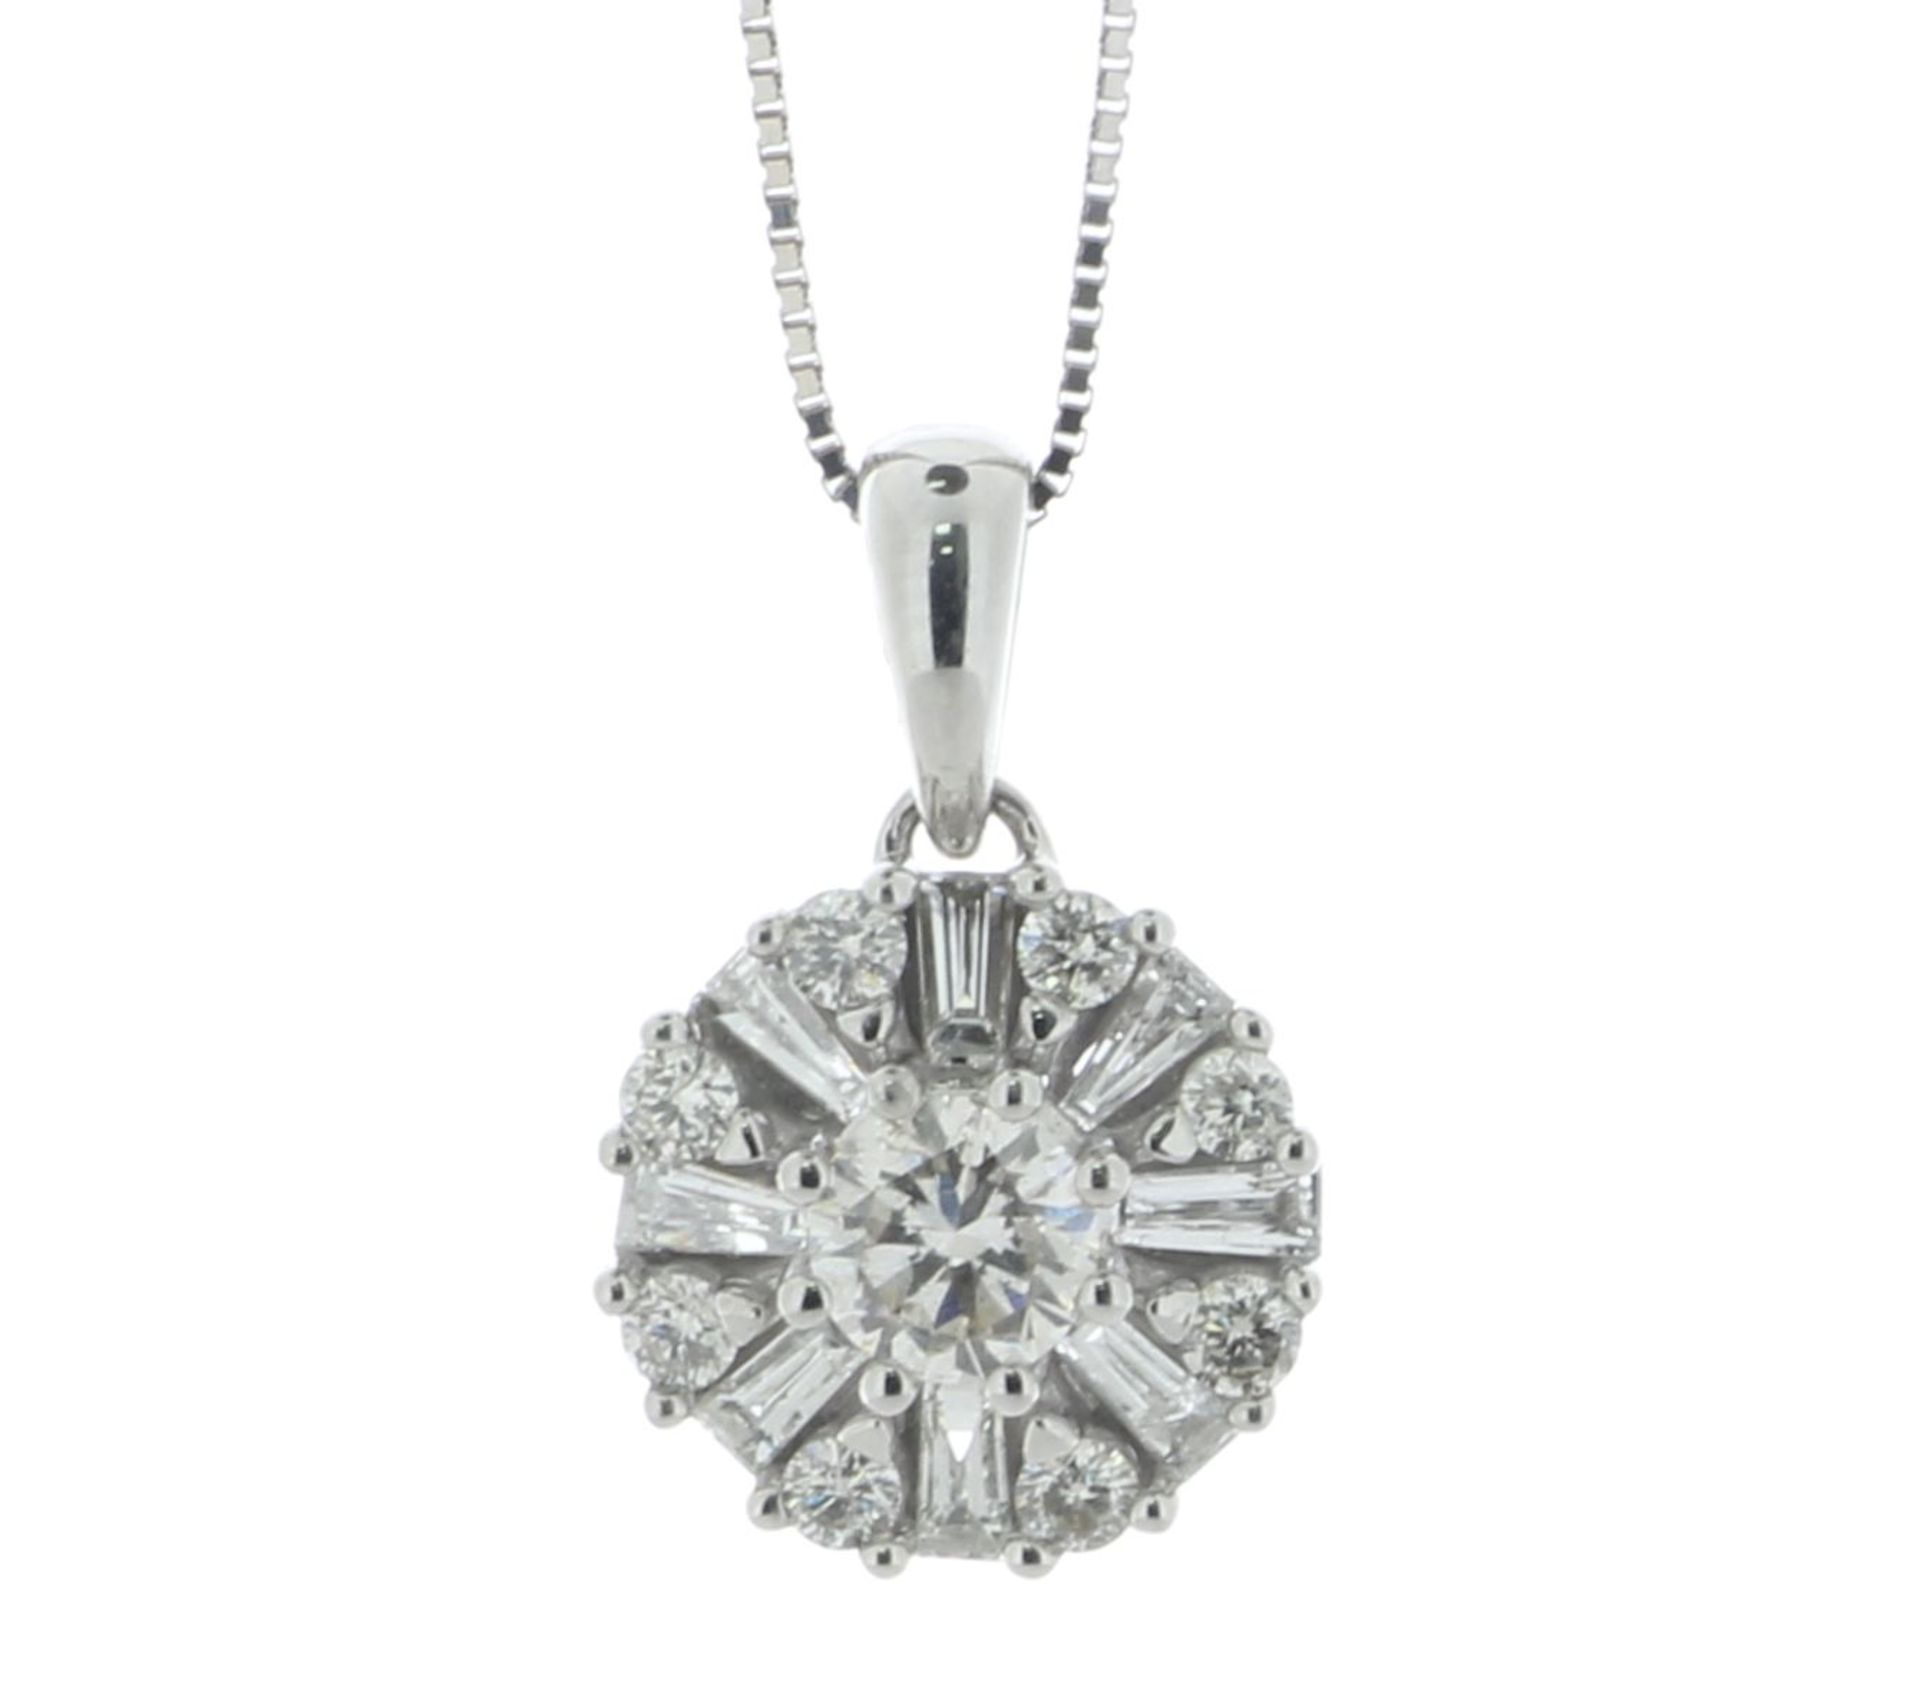 10ct White Gold Fancy Cluster Diamond Pendant And 18" Chain 1.00 Carats - Valued By AGI £4,995.